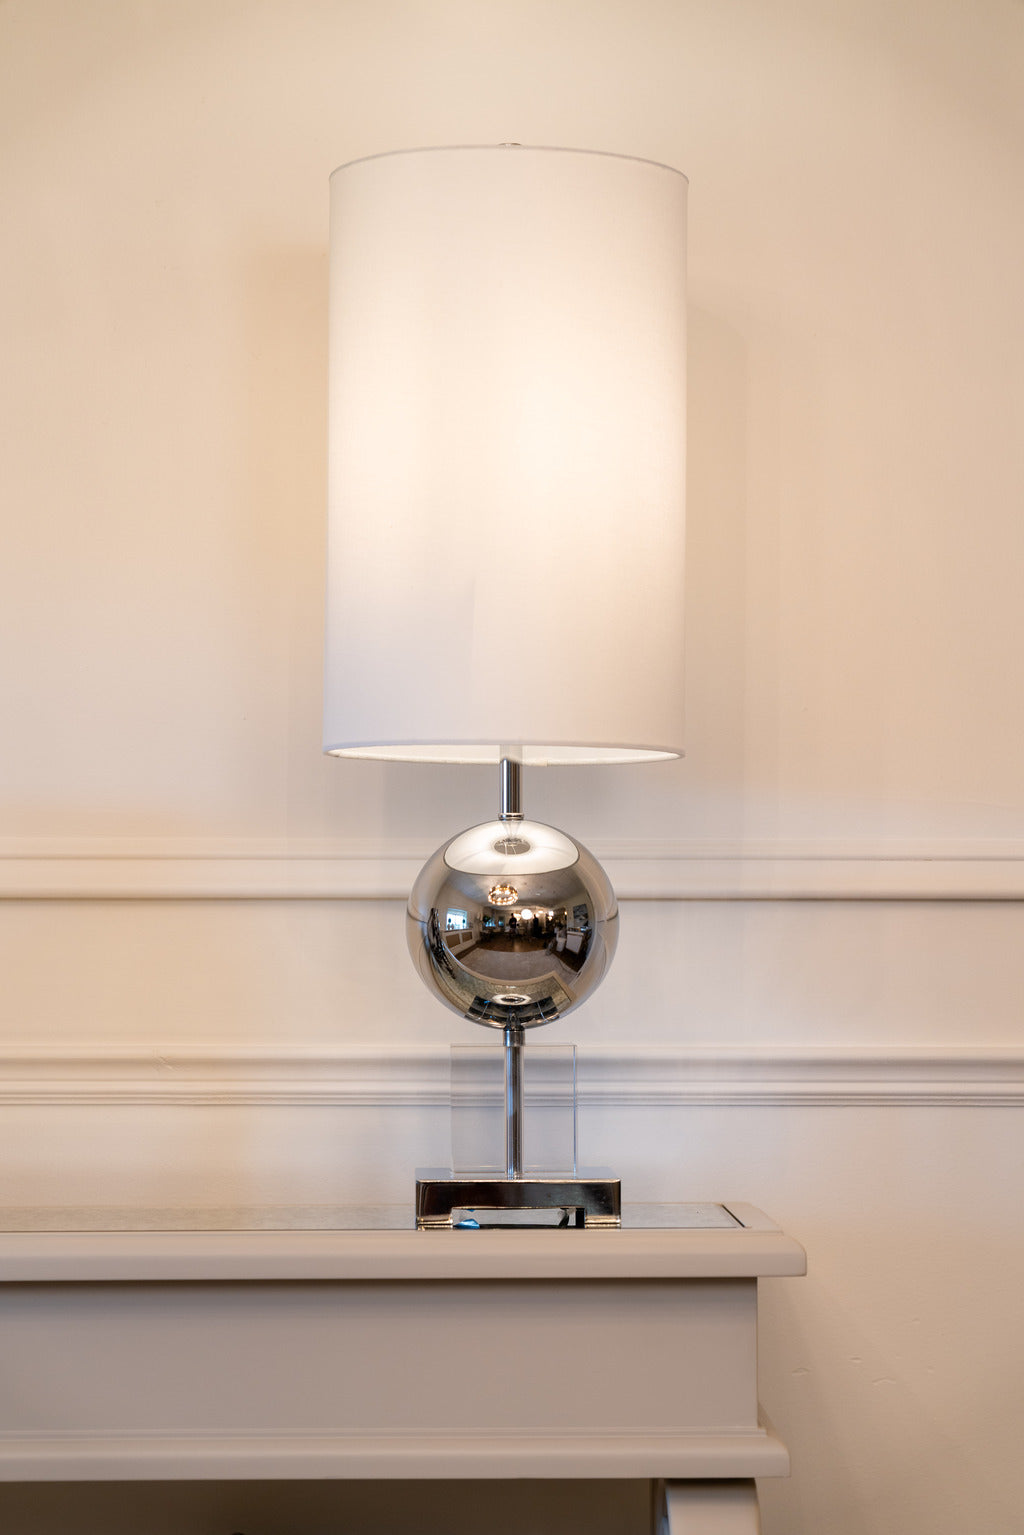 Silver lamps, lighting, table lamps, silver table lamps, home decor, Interiors